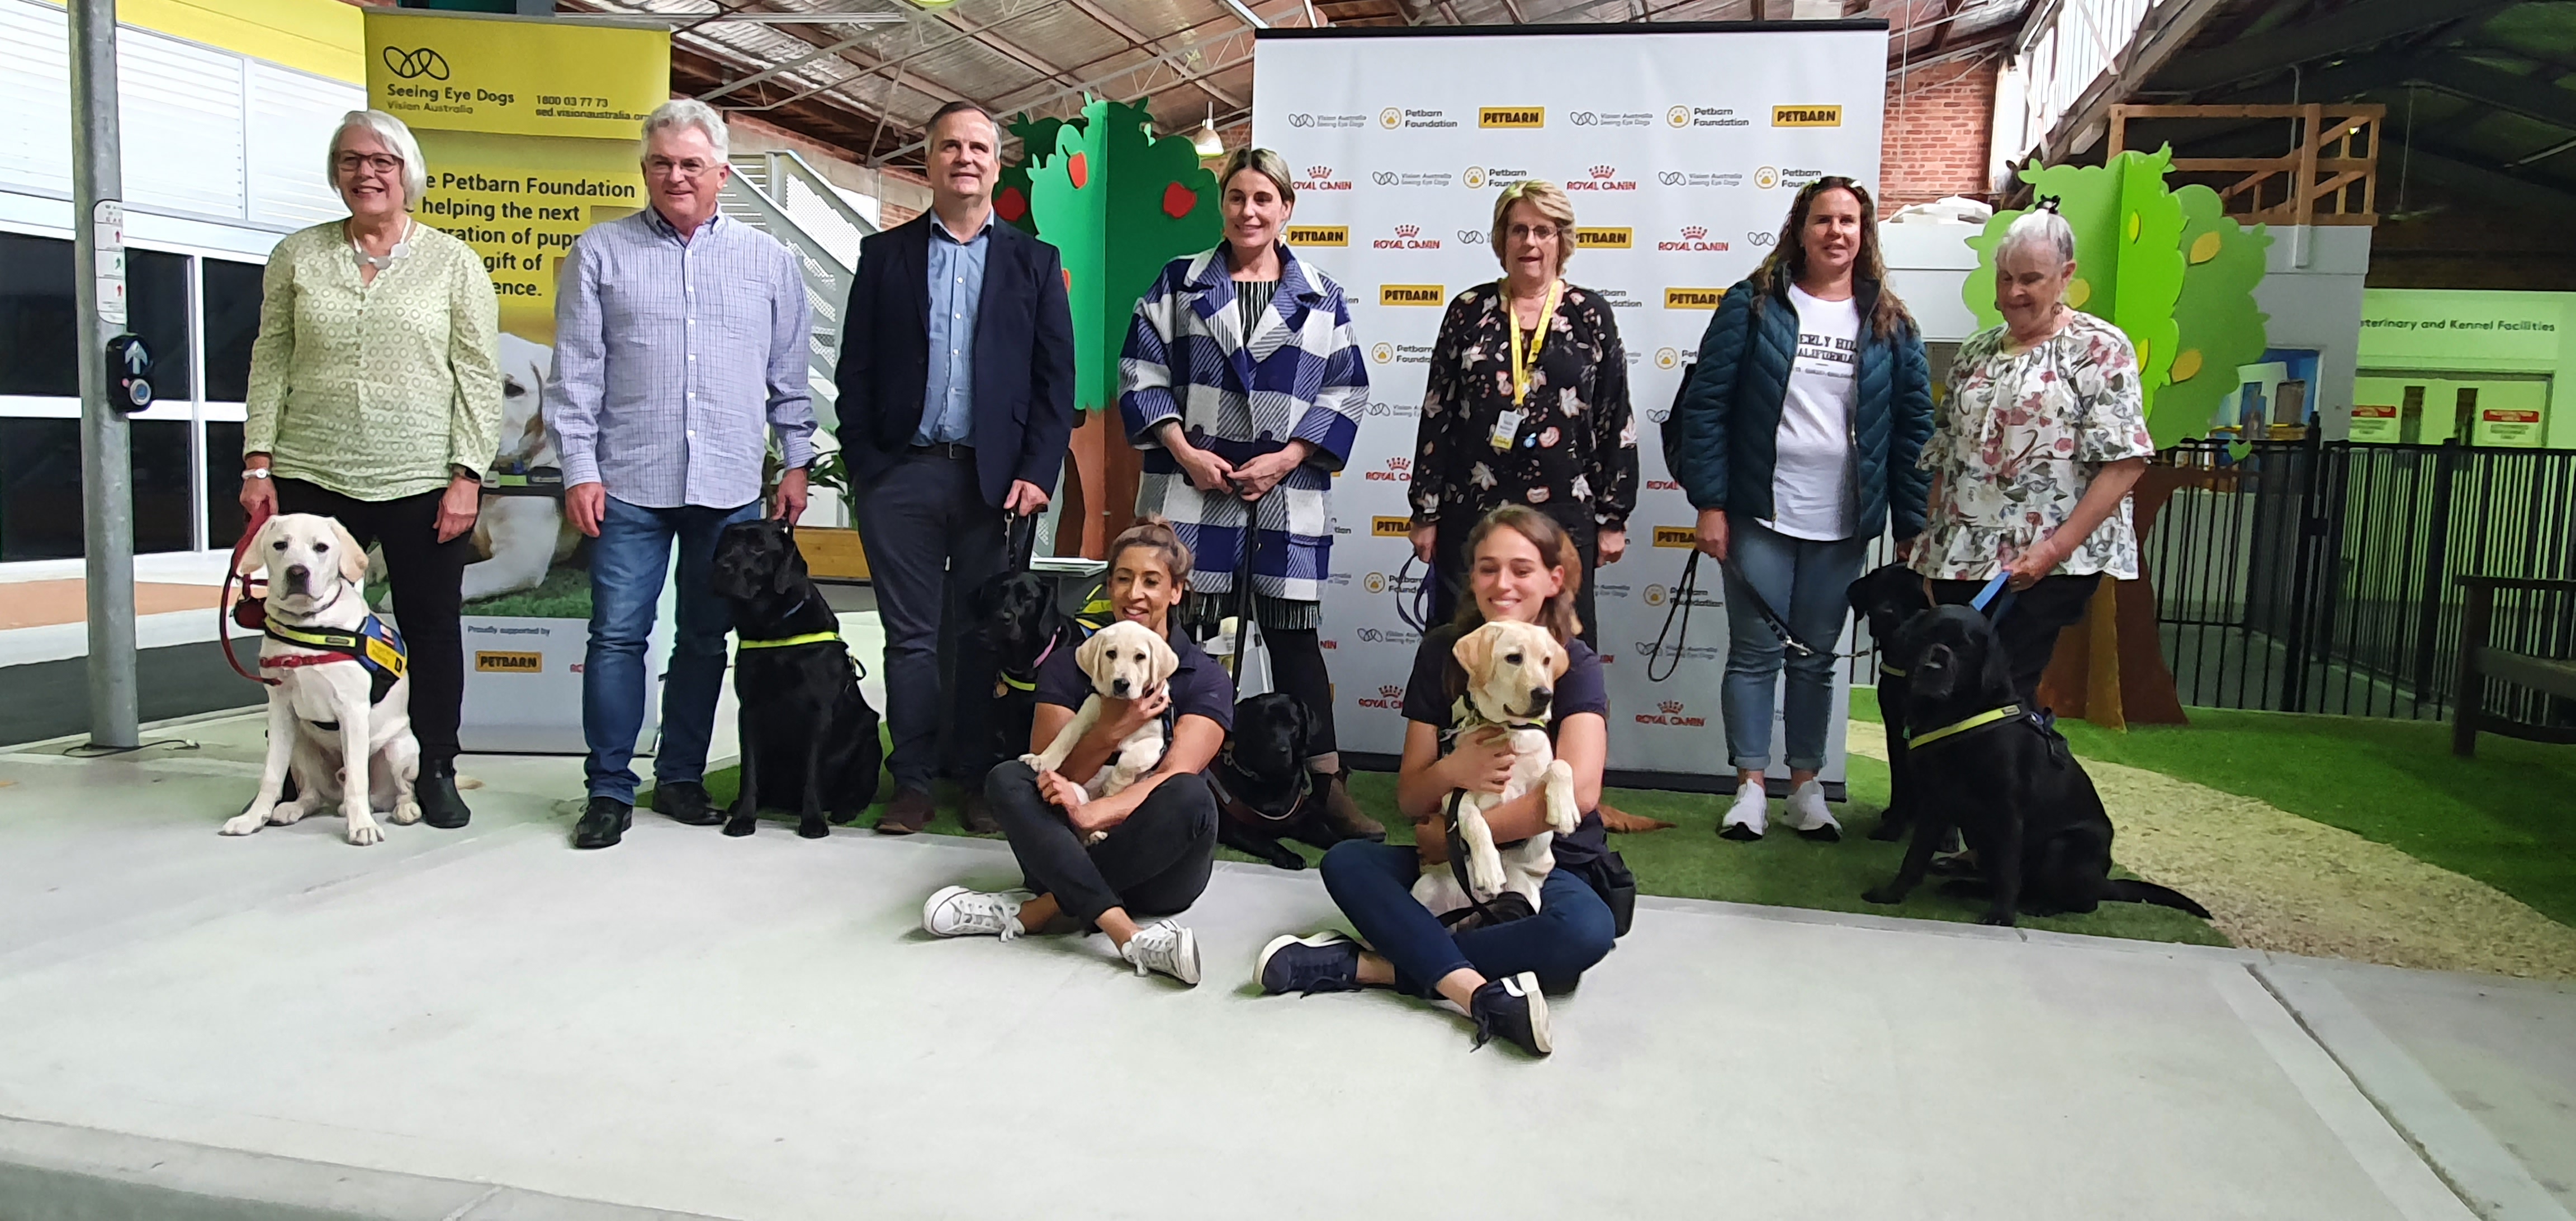 "A group of current and former graduates, as well as Seeing Eye Dogs staff and volunteers, and a number of Seeing Eye Dogs standing in the Mobility Training Centre"